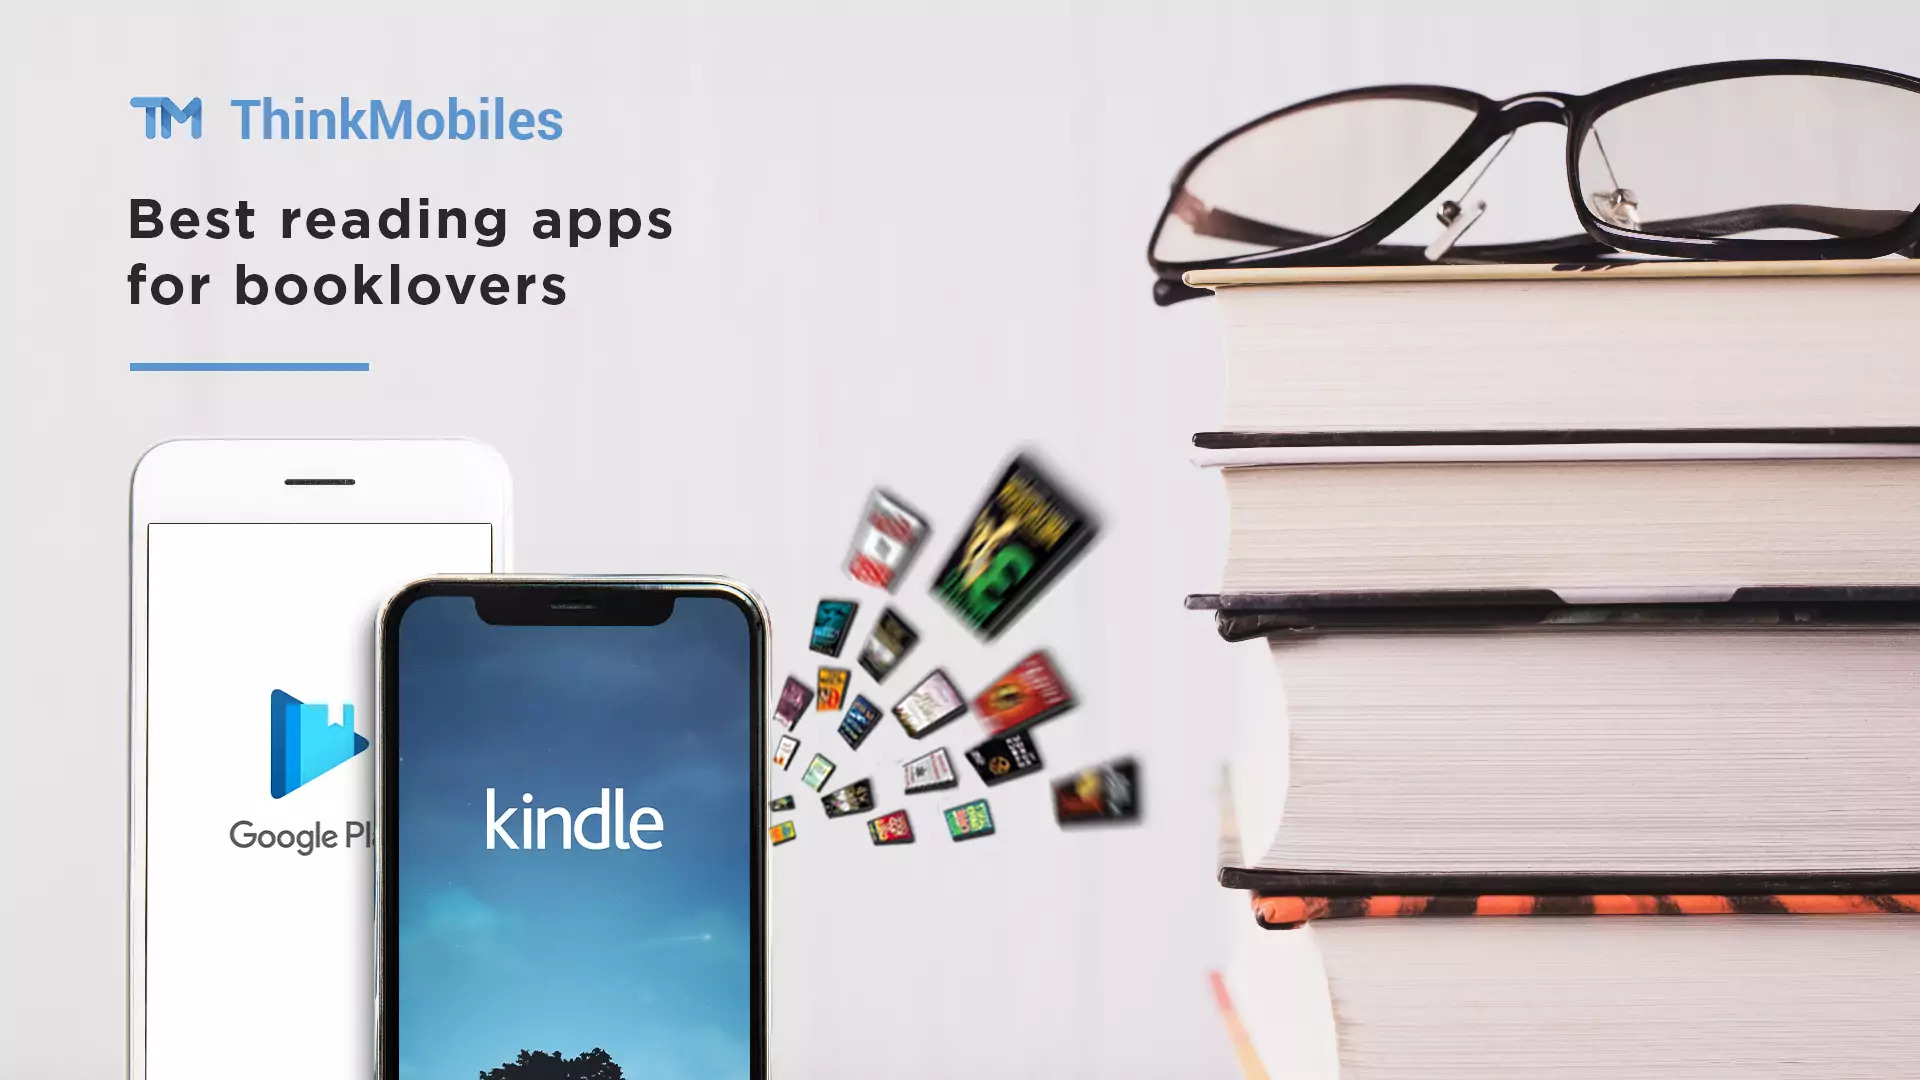 Best reading apps for booklovers